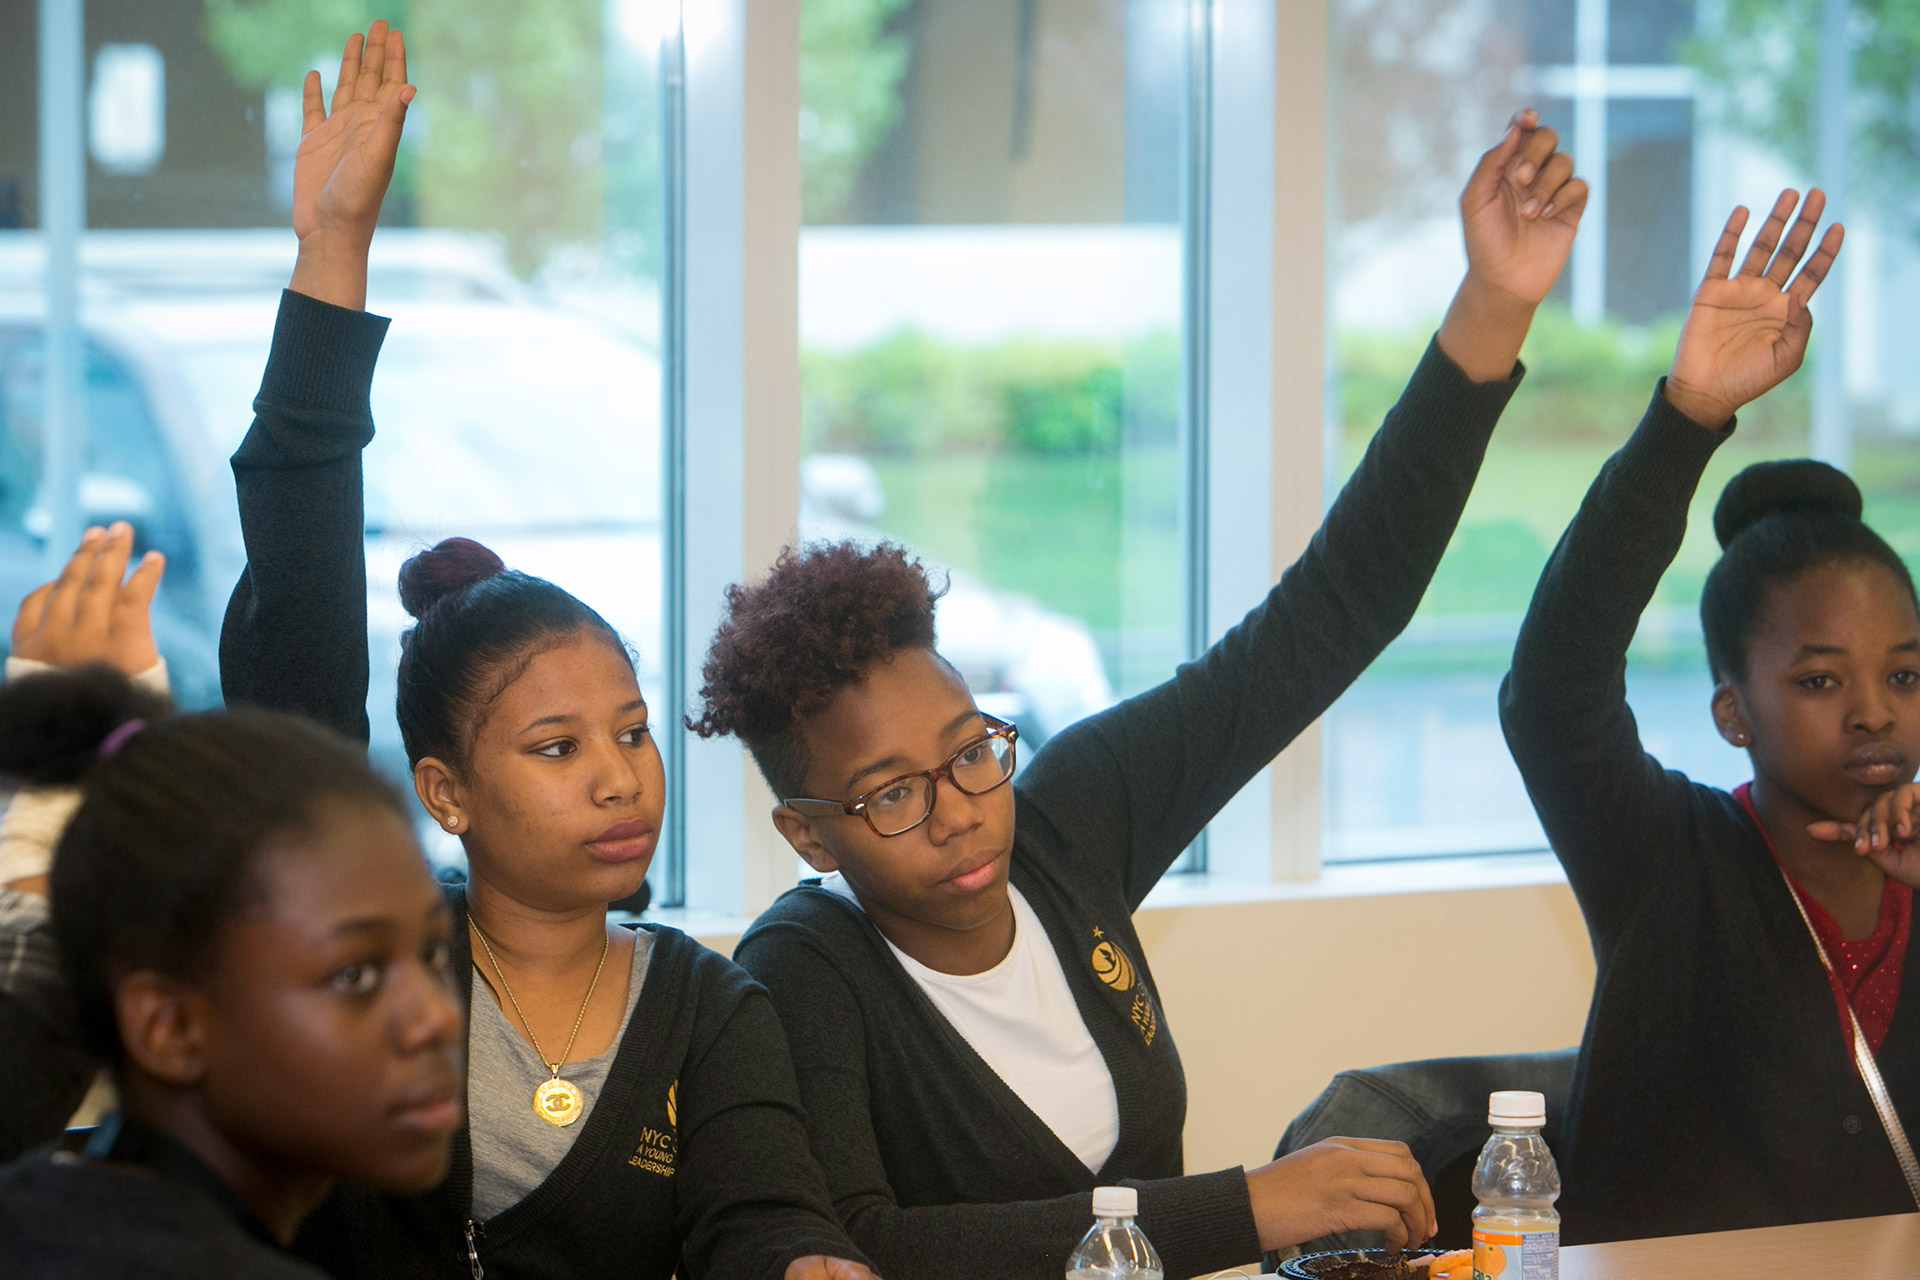 Two girls in class raising their hands